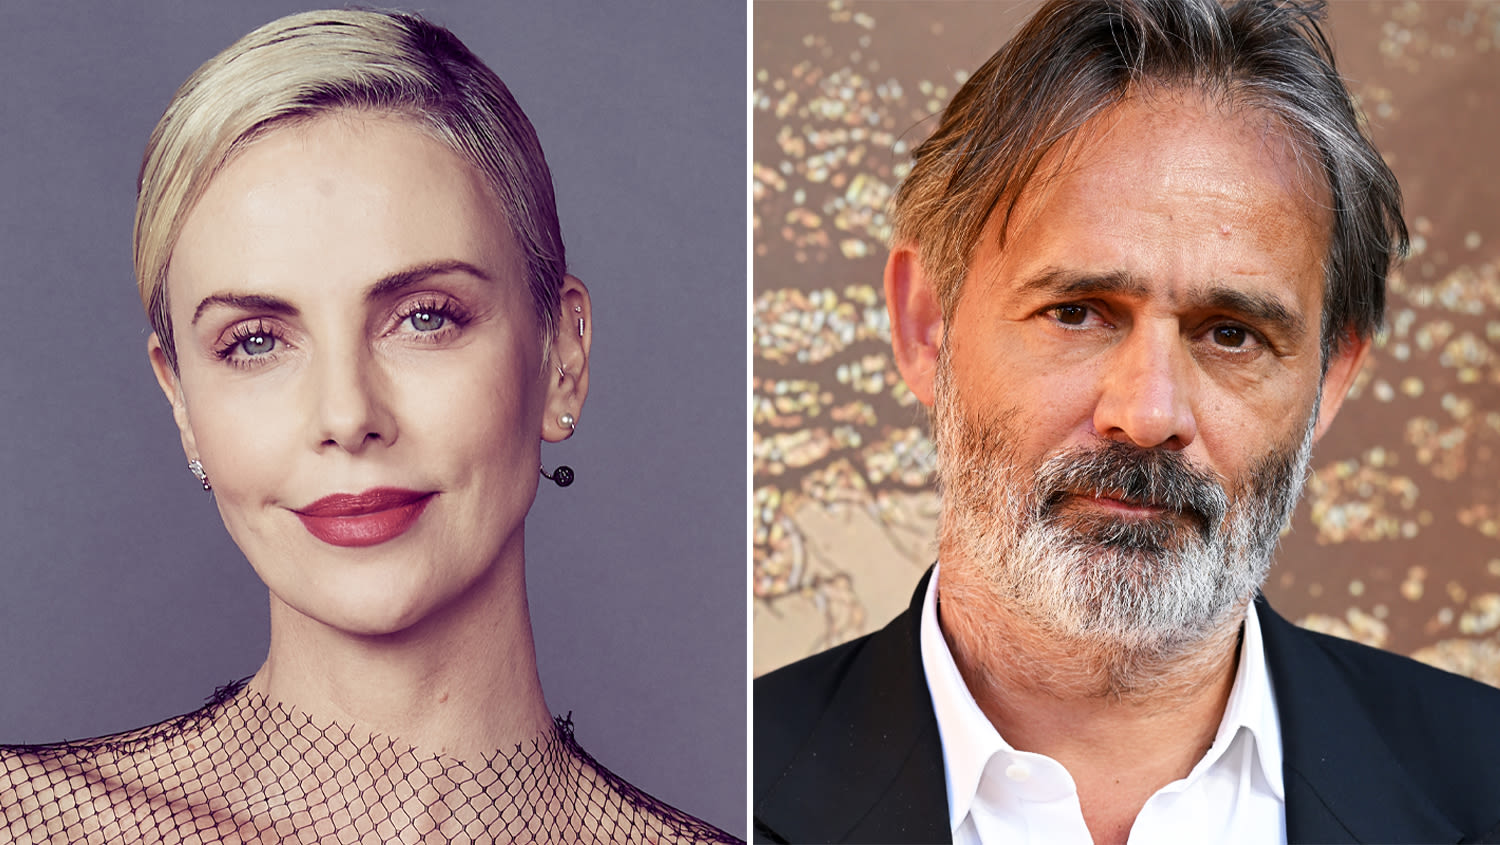 Charlize Theron To Star In The Thriller ‘Apex’ For Netflix With Baltasar Kormákur Directing